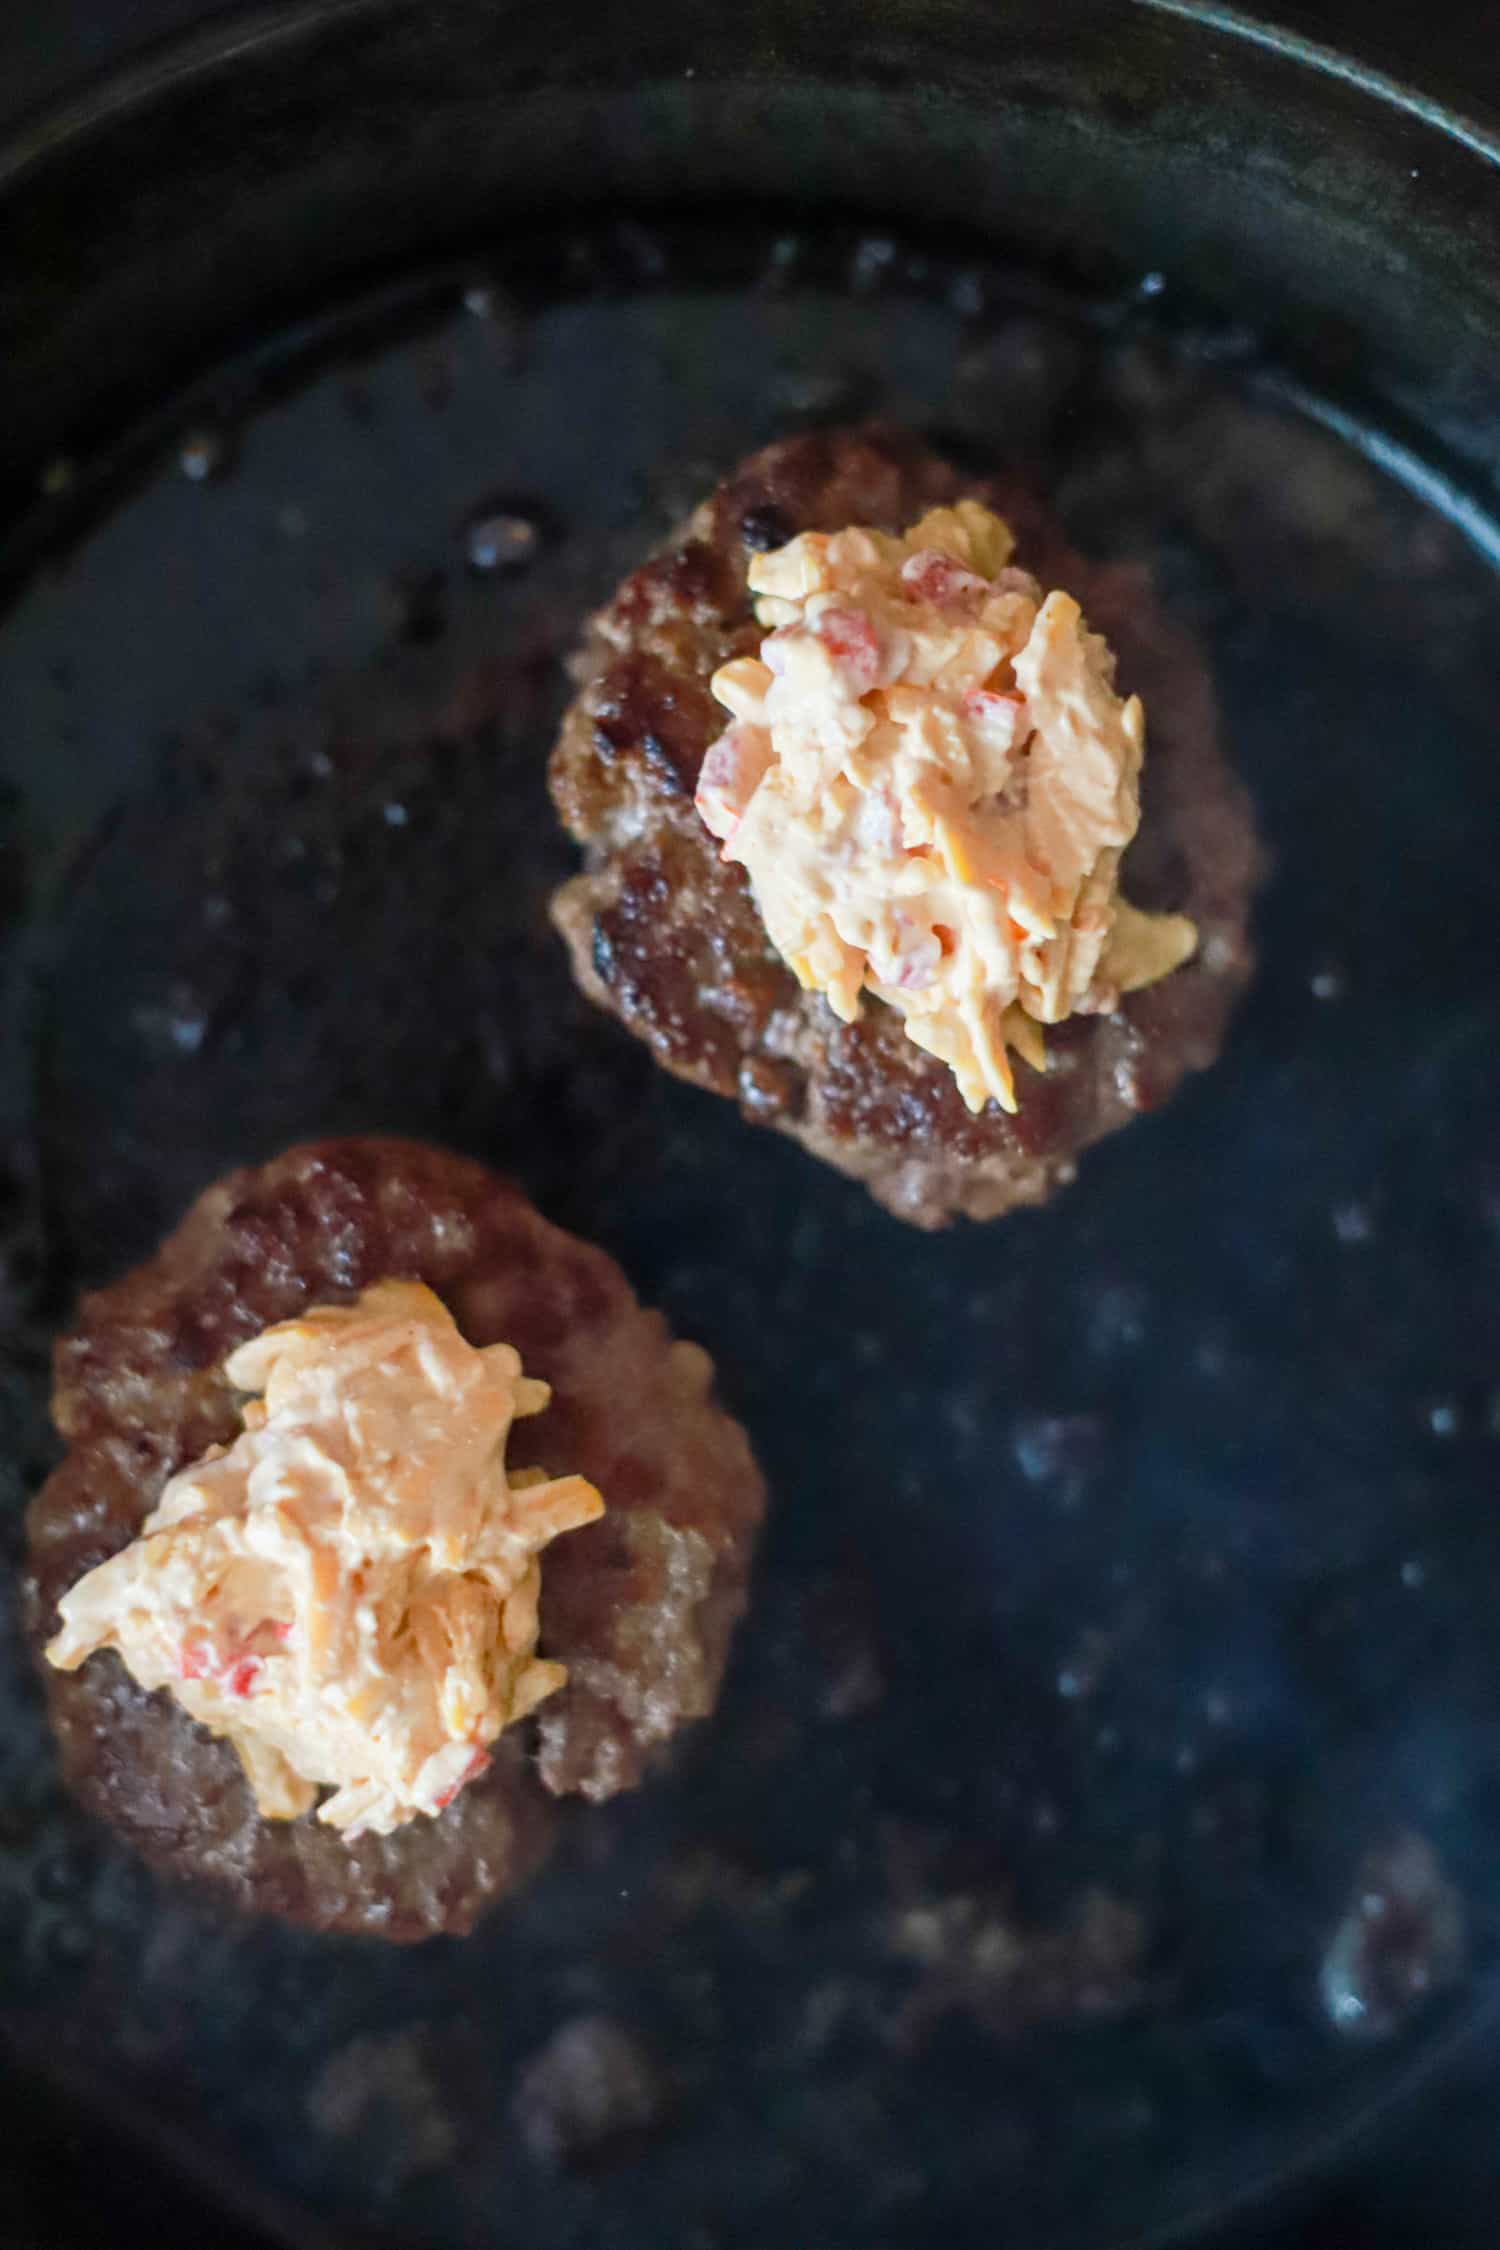 cast iron skillet smashburgers topped with pimento cheese.